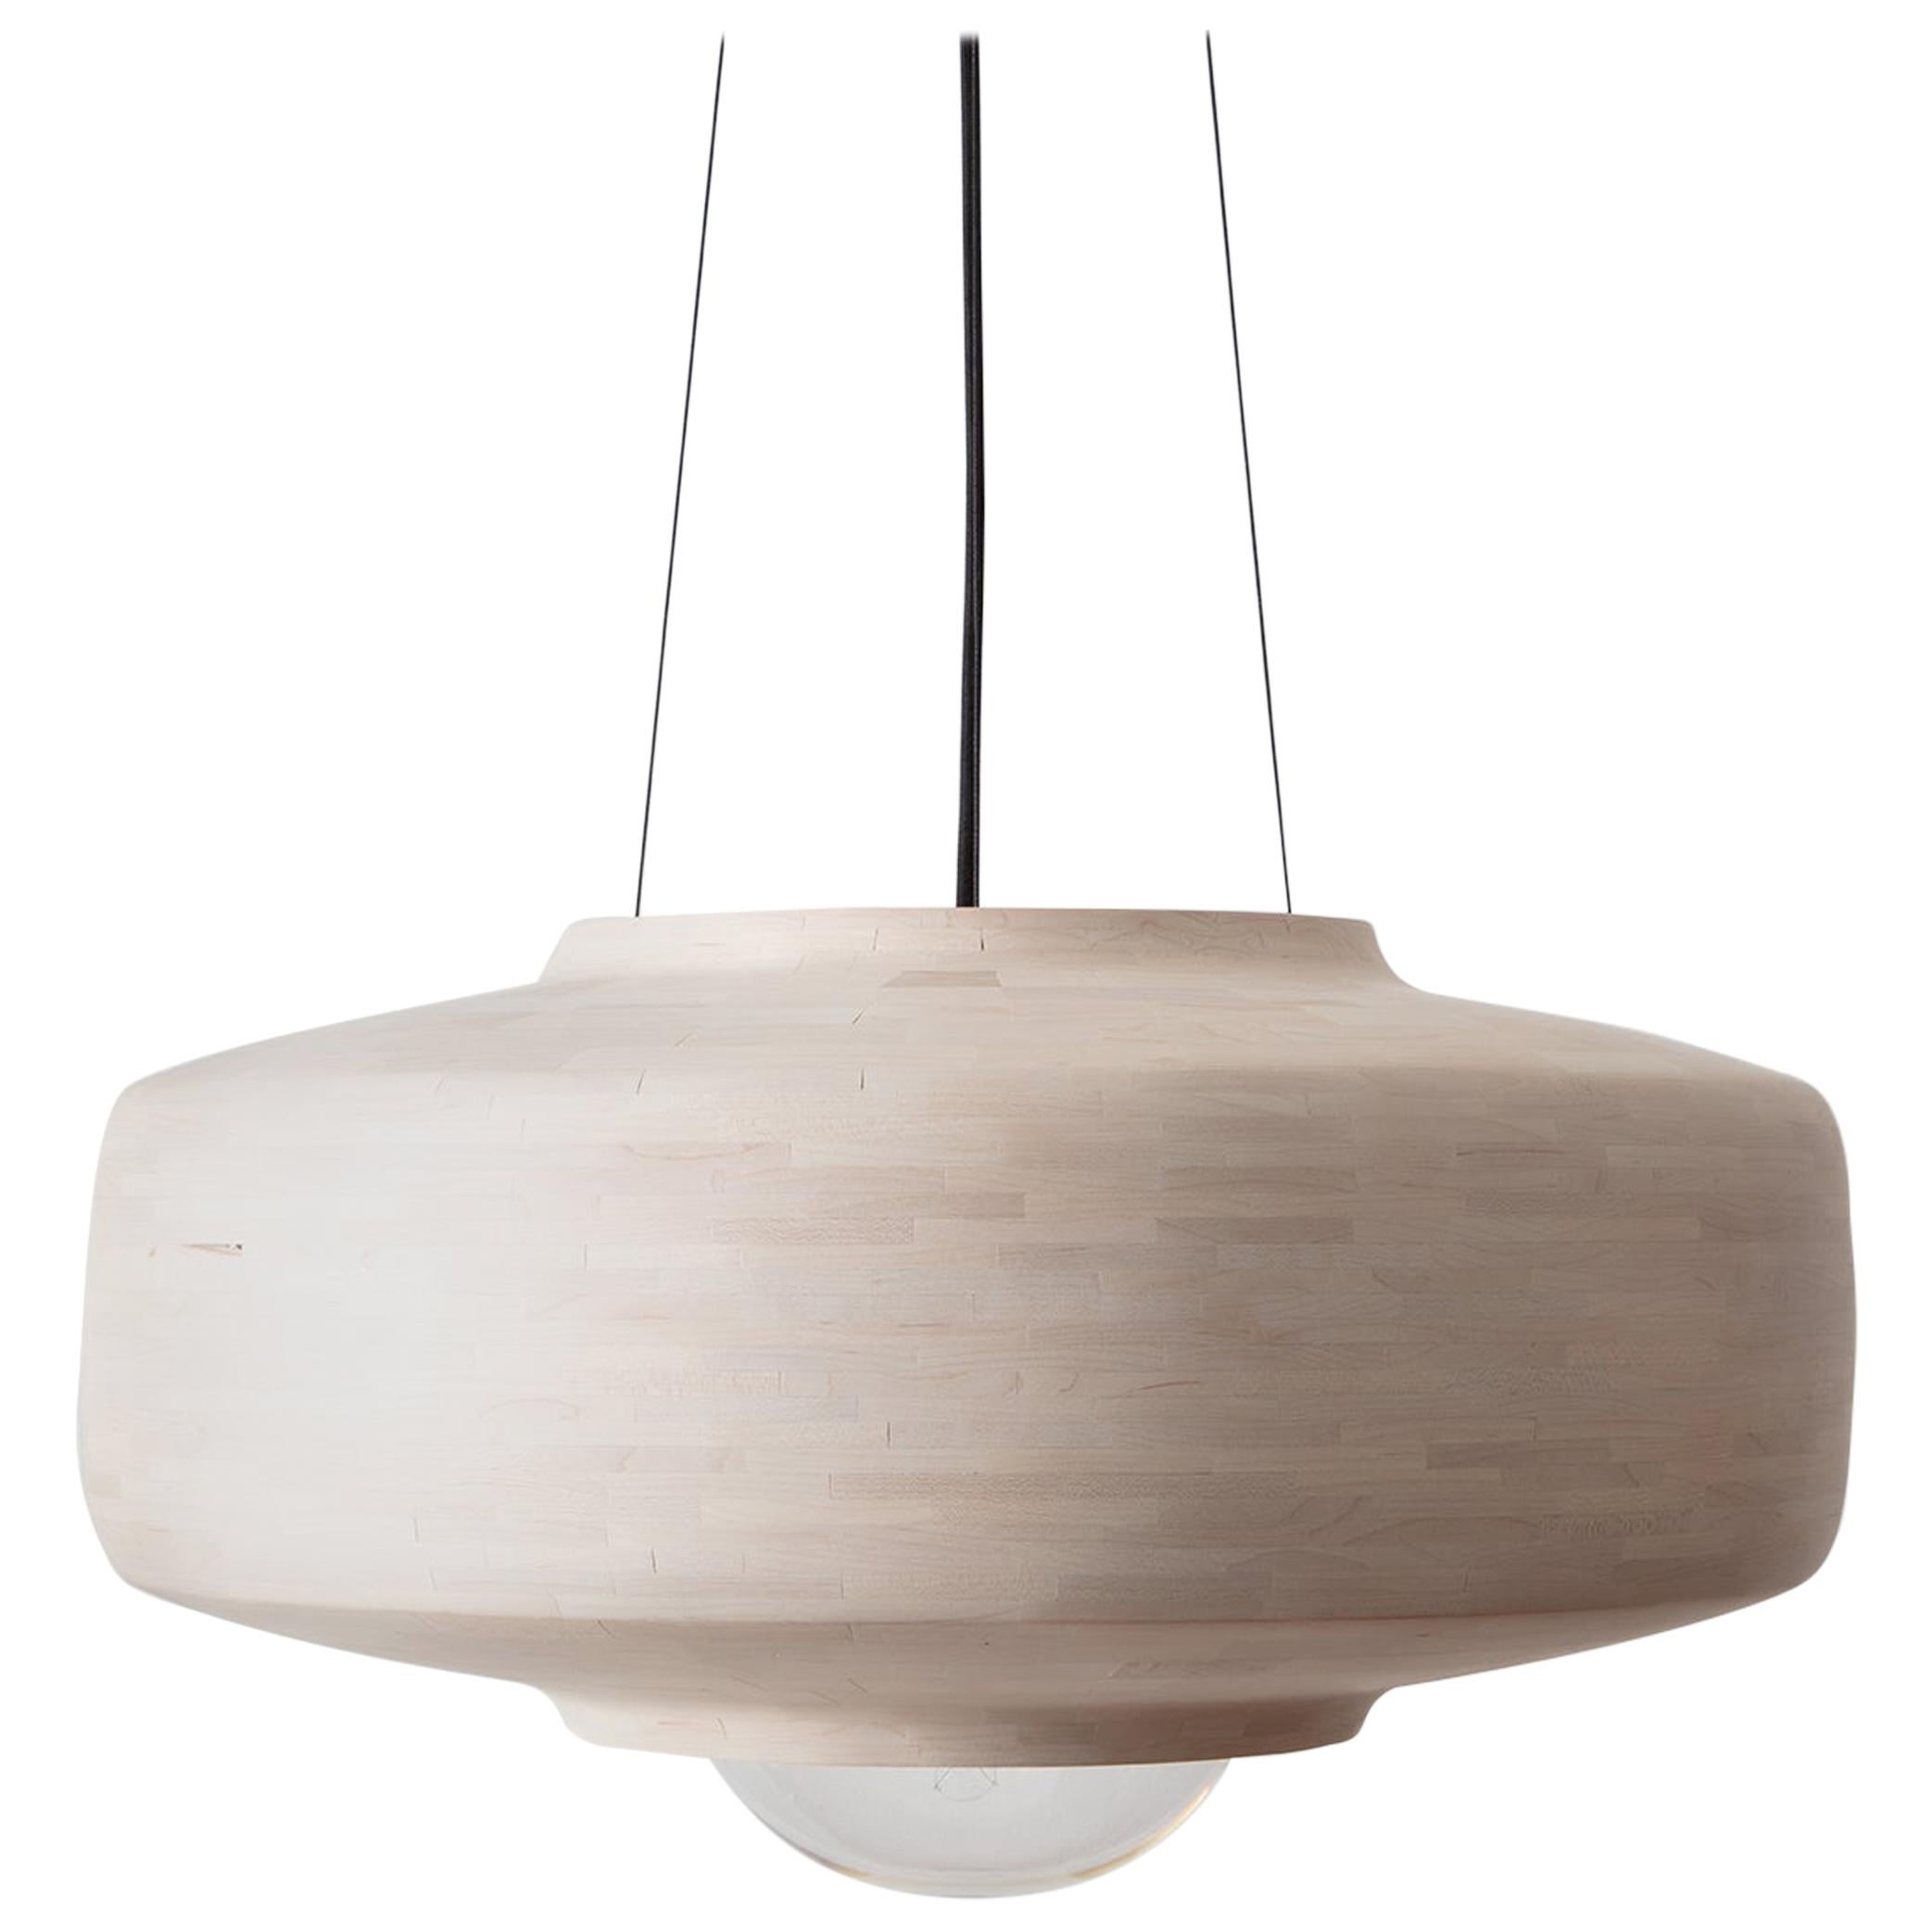 STACKED Illuminated Saucer Sculpture, Customizable, Shown in Bone White Maple For Sale